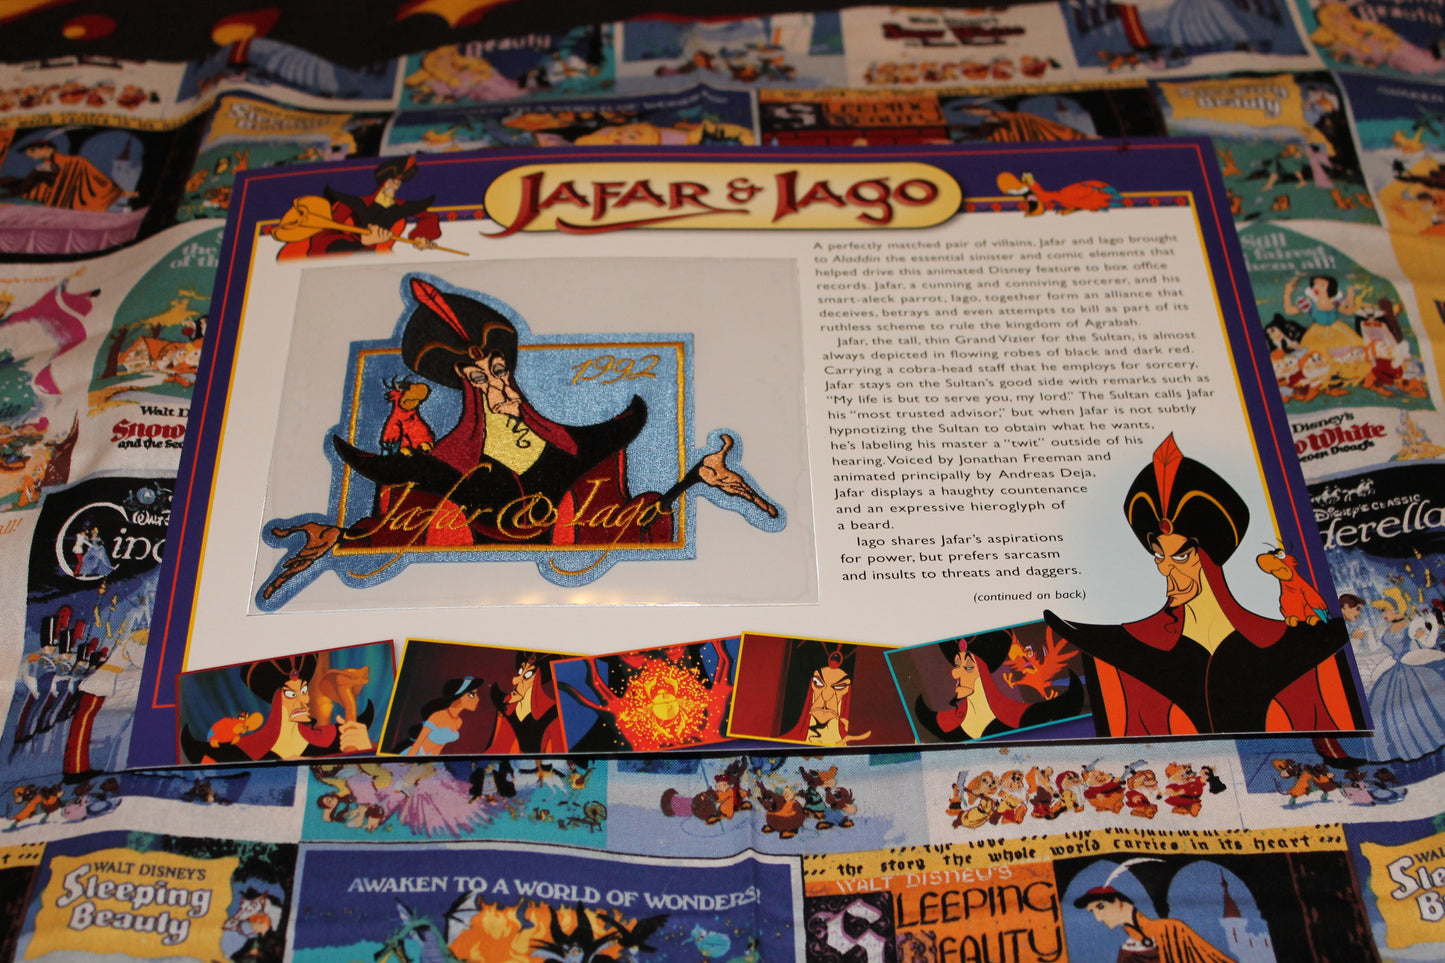 Willabee and Ward Disney Collector Patches, "Jafar and Iago"